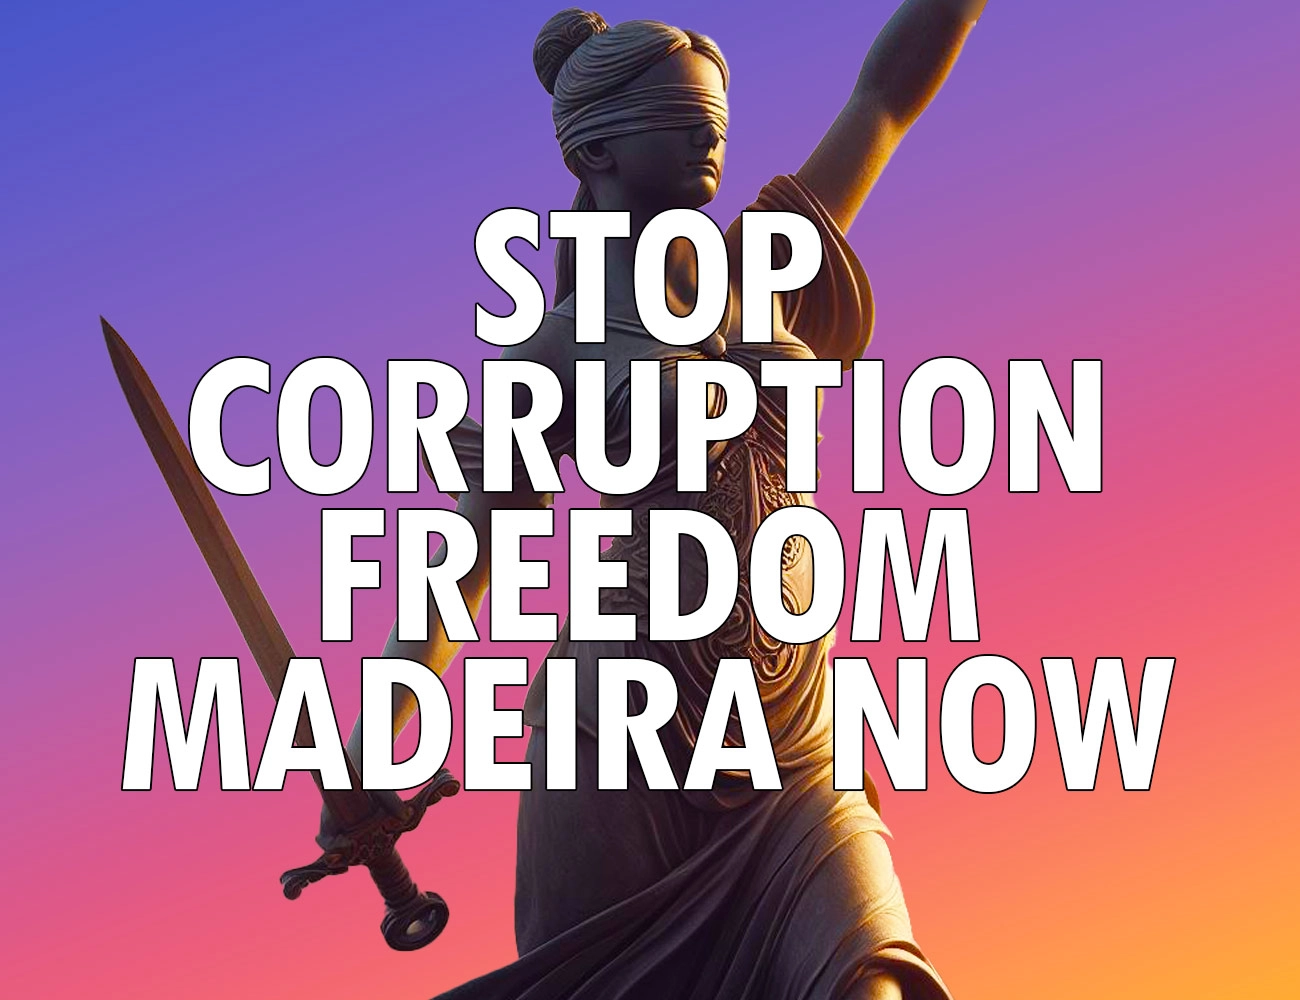 "Stop Corruption Freedom Madeira Now"